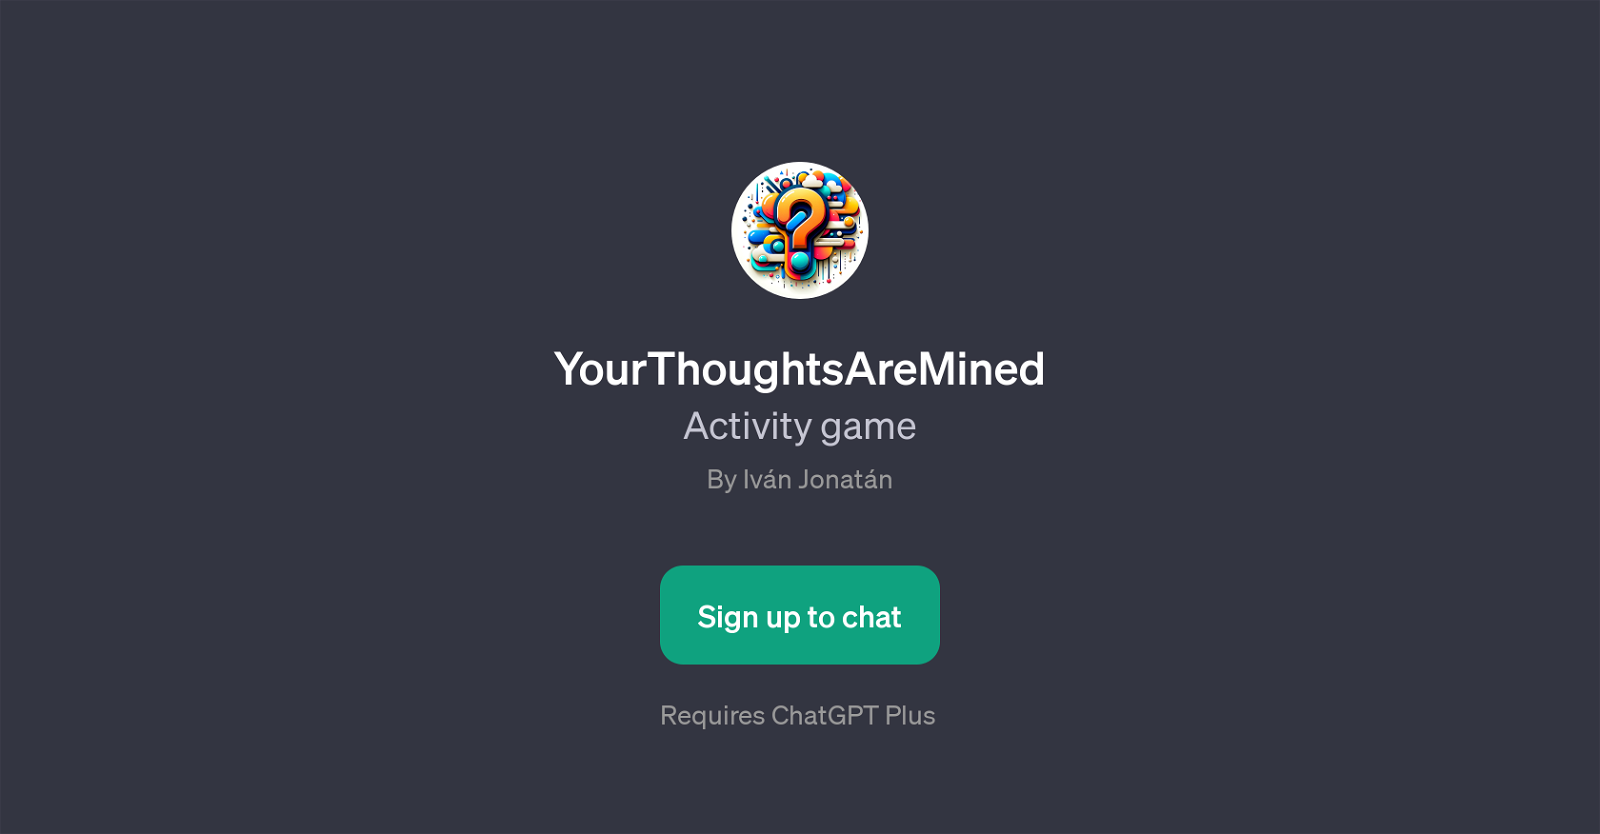 YourThoughtsAreMined website